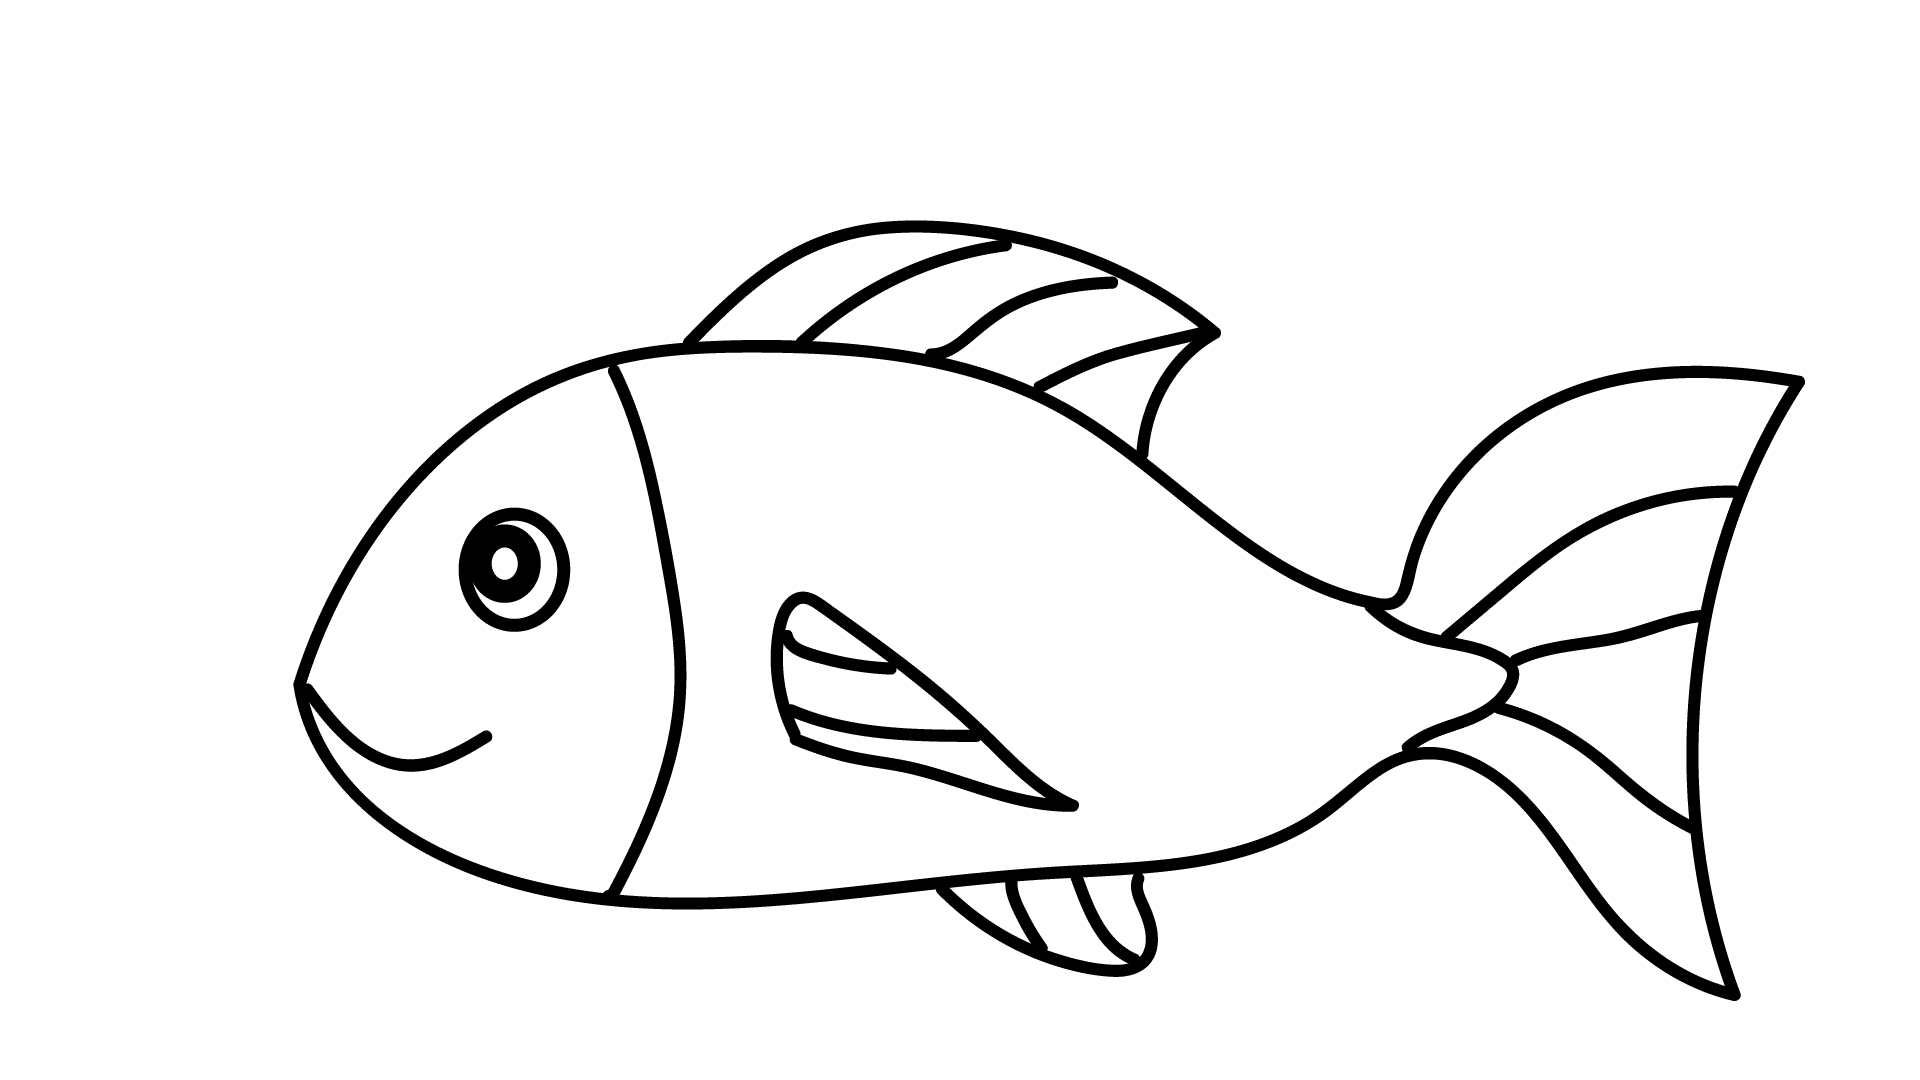 How to draw a fish - Step 5